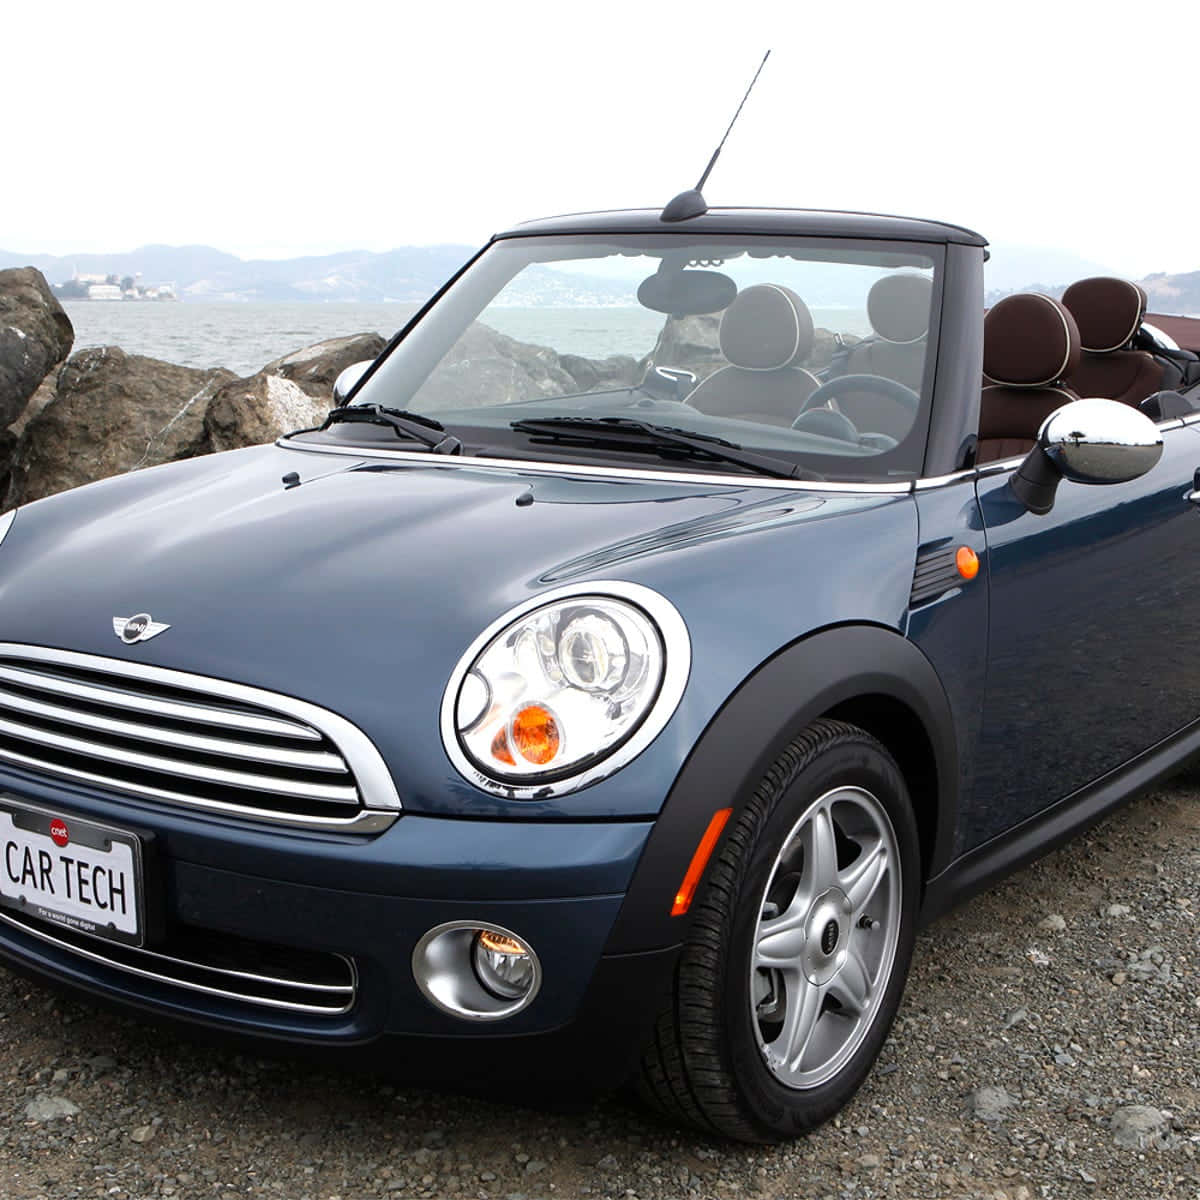 Stunning Mini Cooper Convertible on the Road Wallpaper